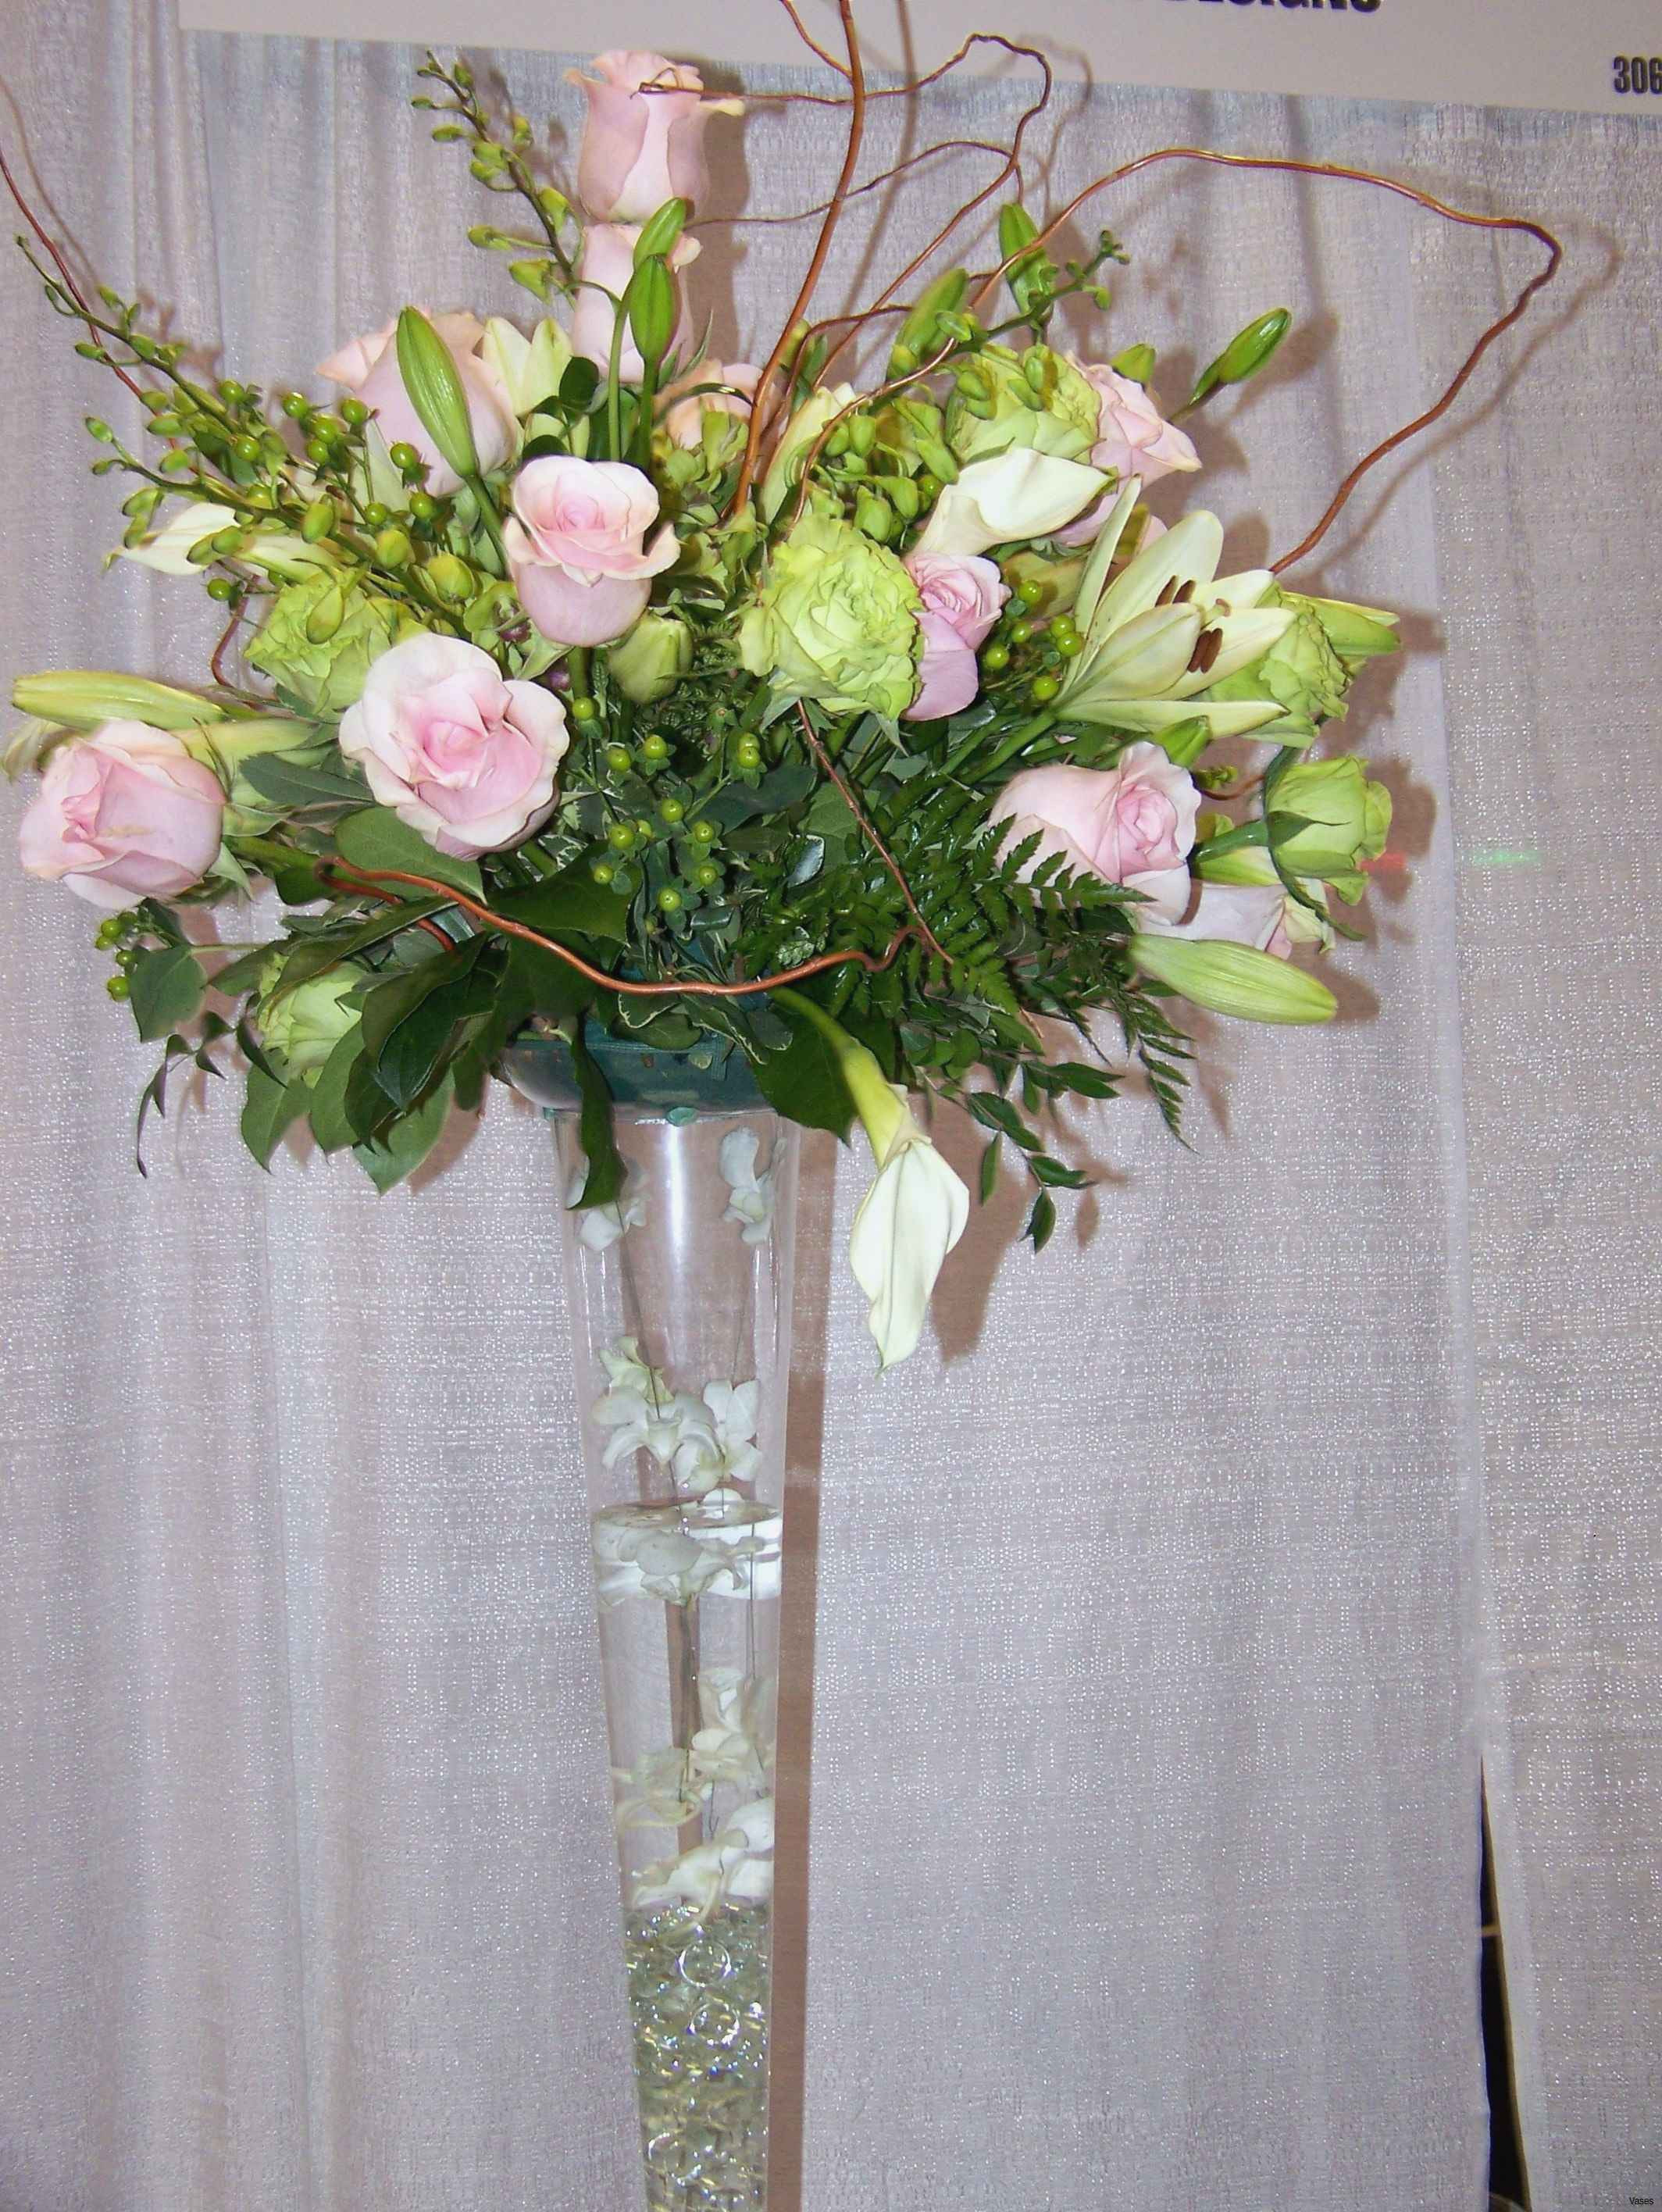 26 Stylish Clear Vases for Weddings 2024 free download clear vases for weddings of elegant fall wedding bouquet wedding theme in h vases ideas for floral arrangements in i 0d design ideas design inspiration rustic fall